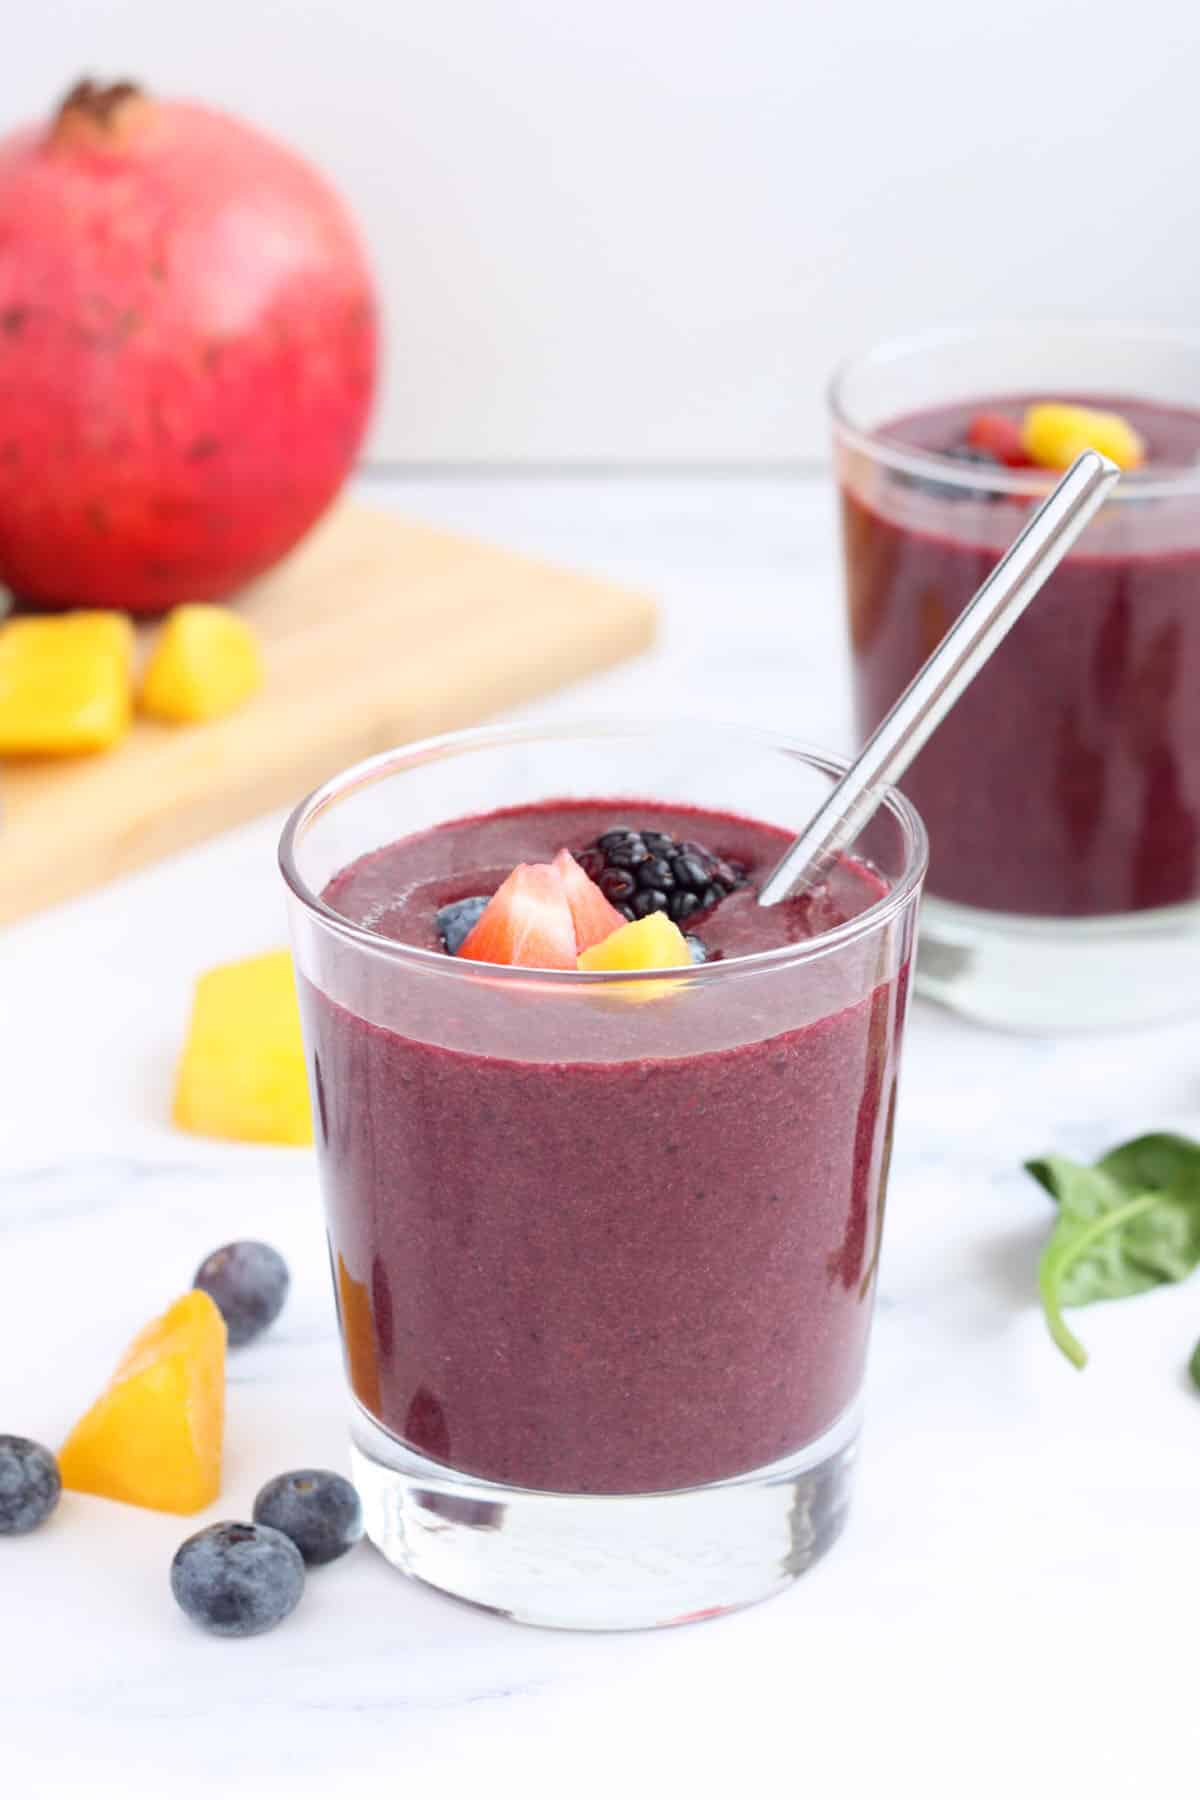 Immune-boosting smoothie served in a glass with a metal straw topped with fruit